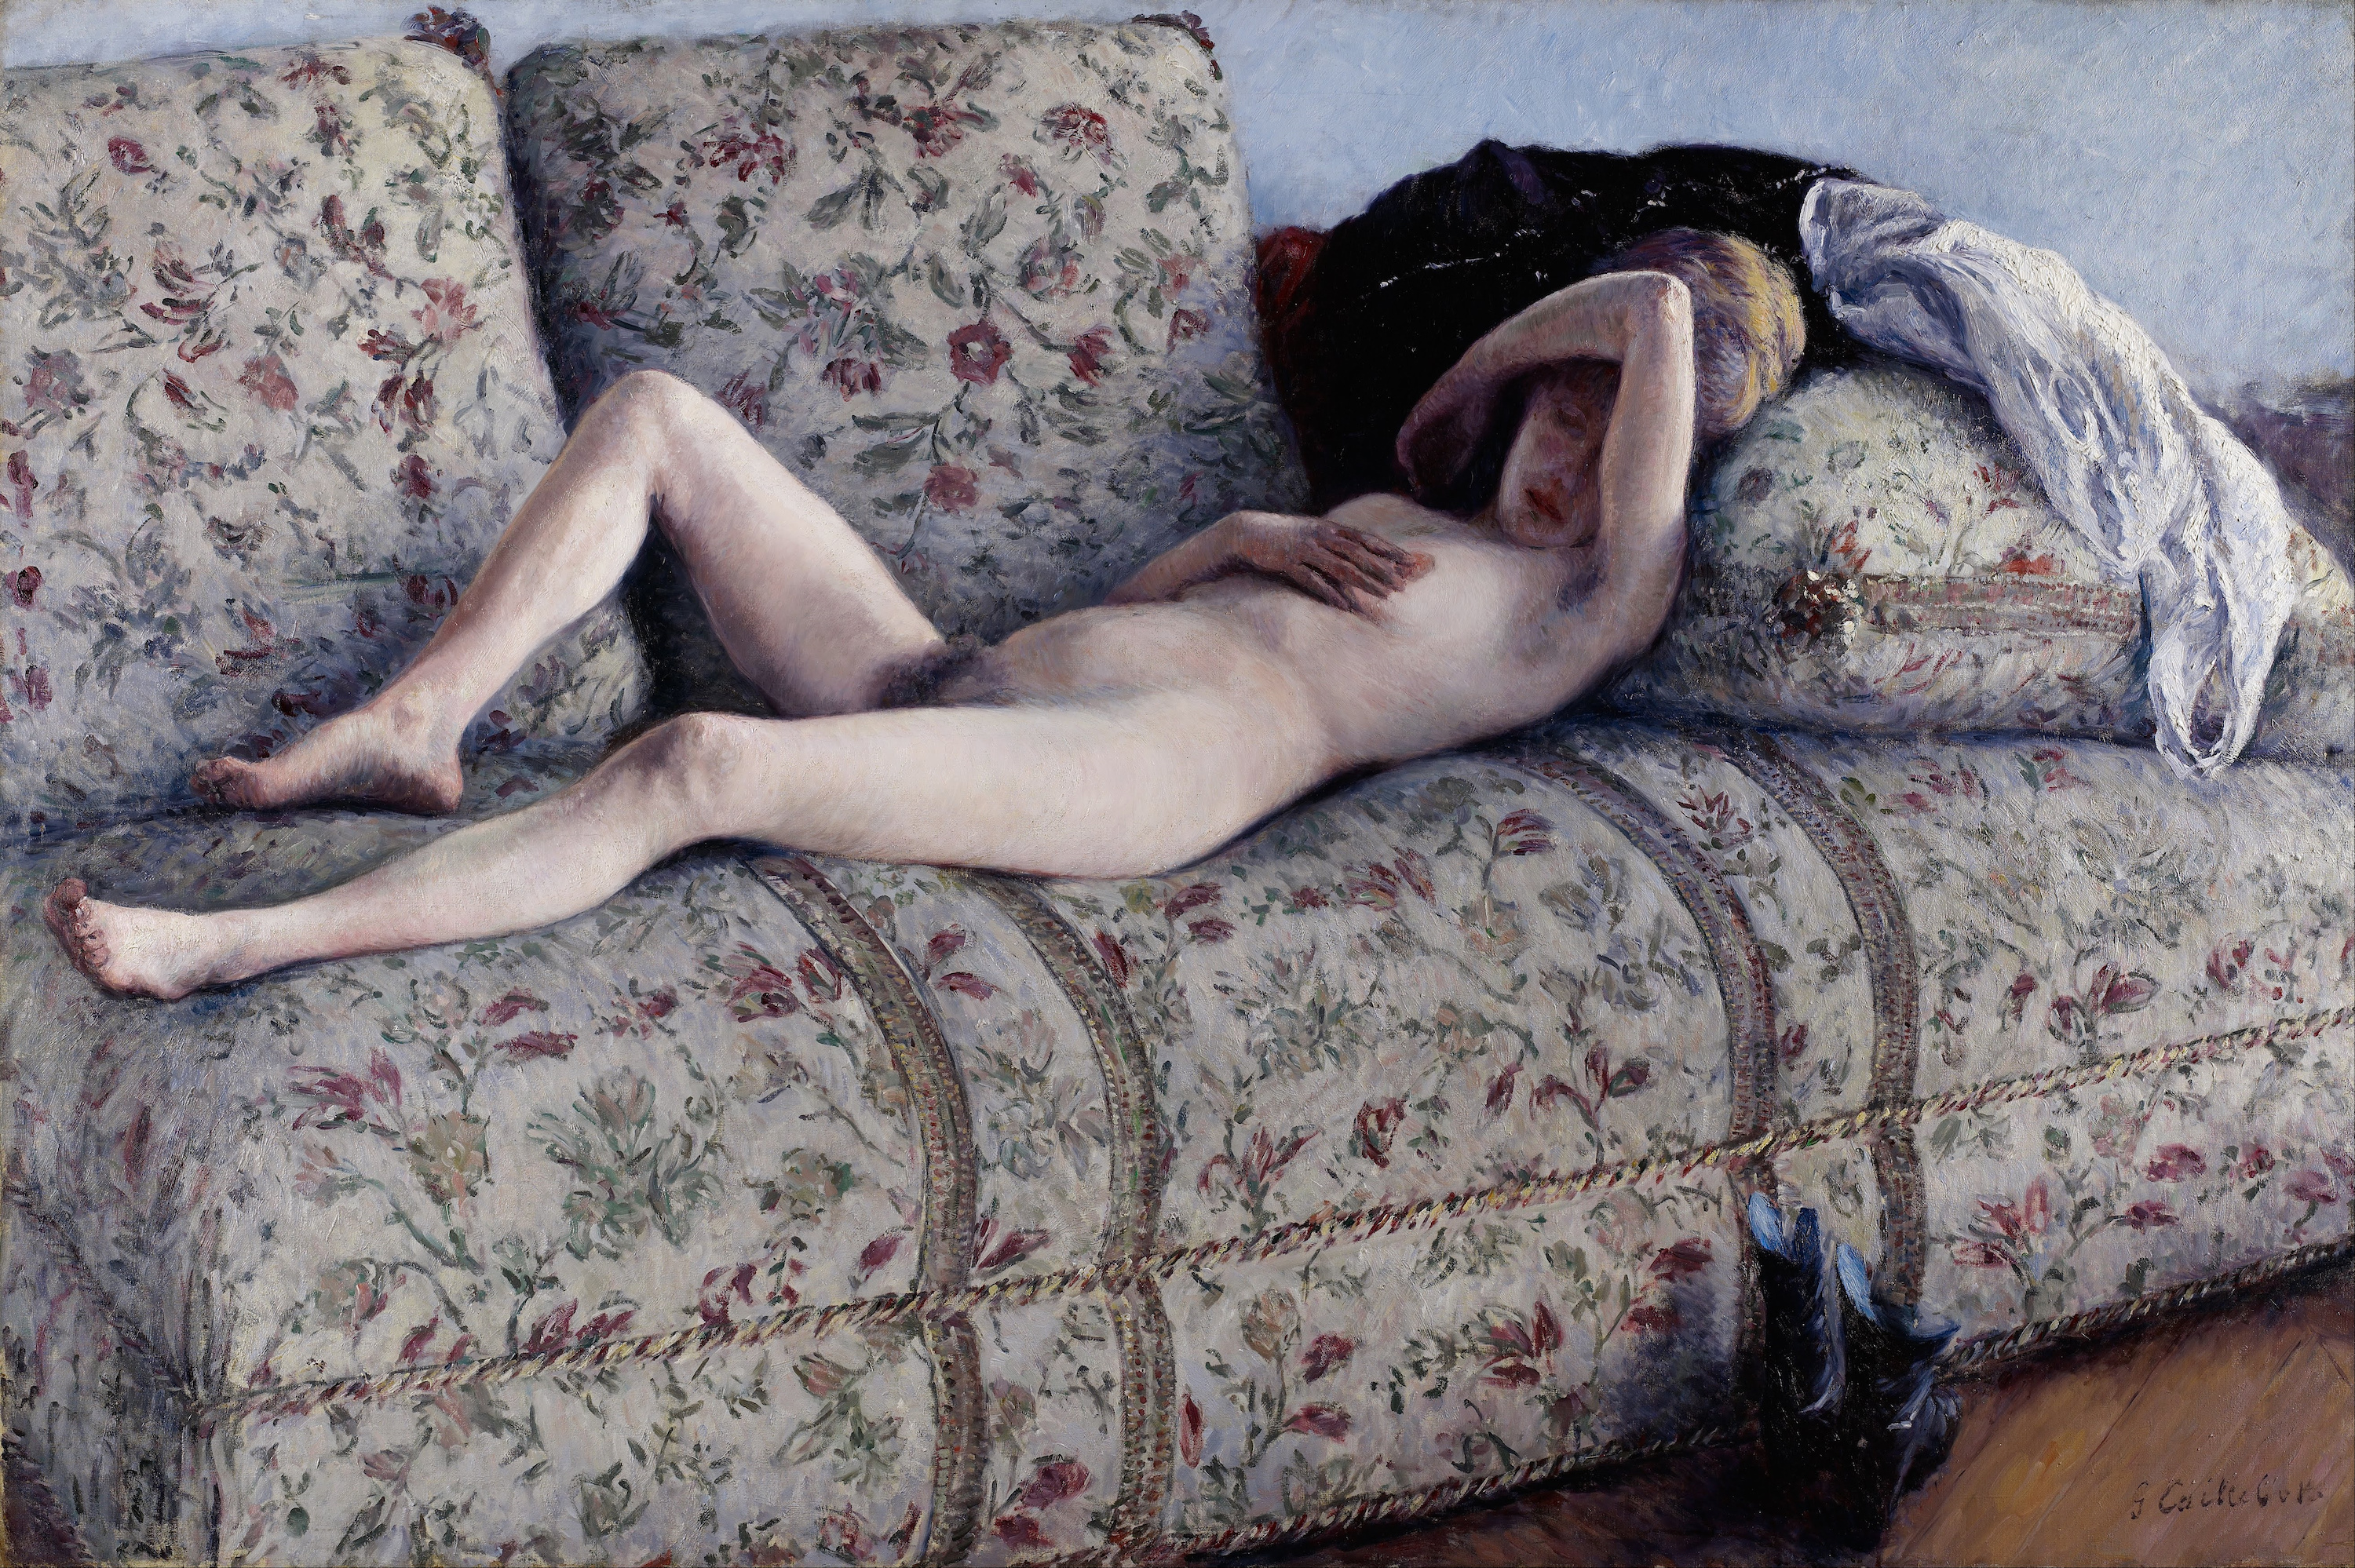 Kanepede yatan Nü by Gustave Caillebotte - c. 1880 